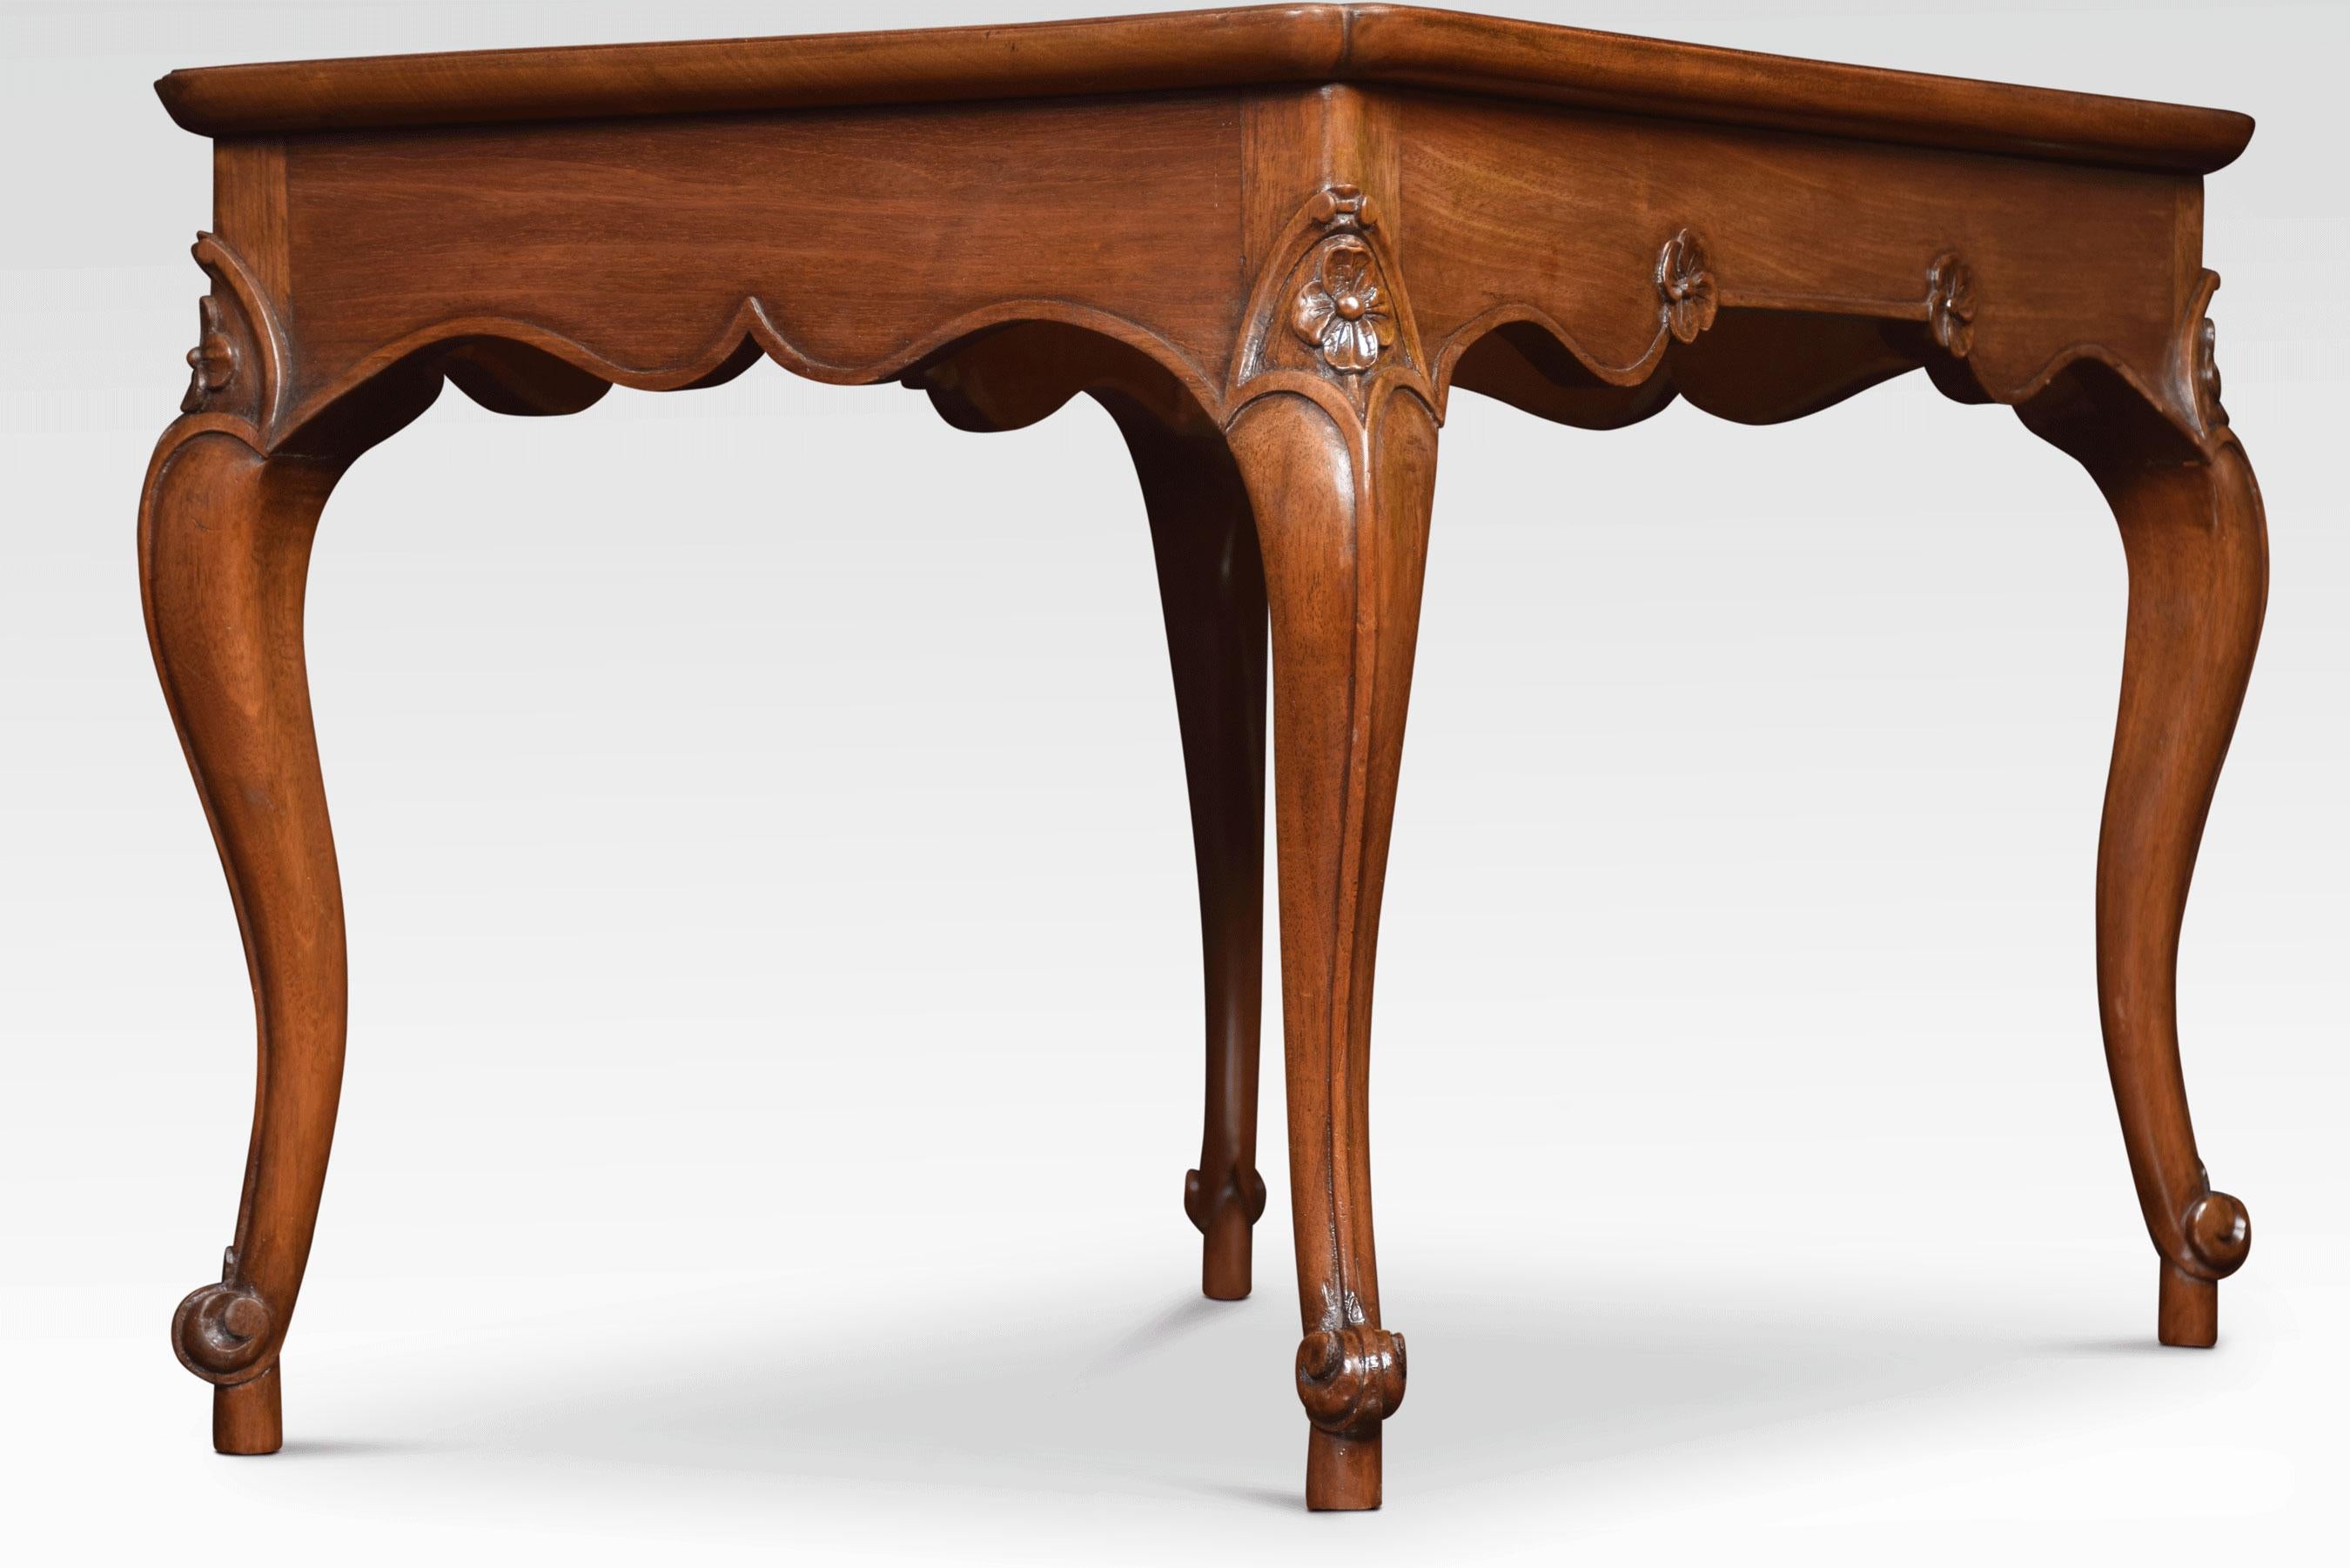 Mahogany coffee table the rectangular top with molded edge and re-entrant corners above the floral decorated frieze. All raised up on four cabriole legs terminating in scrolling toes.
Dimensions:
Height 17.5 inches
Width 26.5 inches
Depth 18